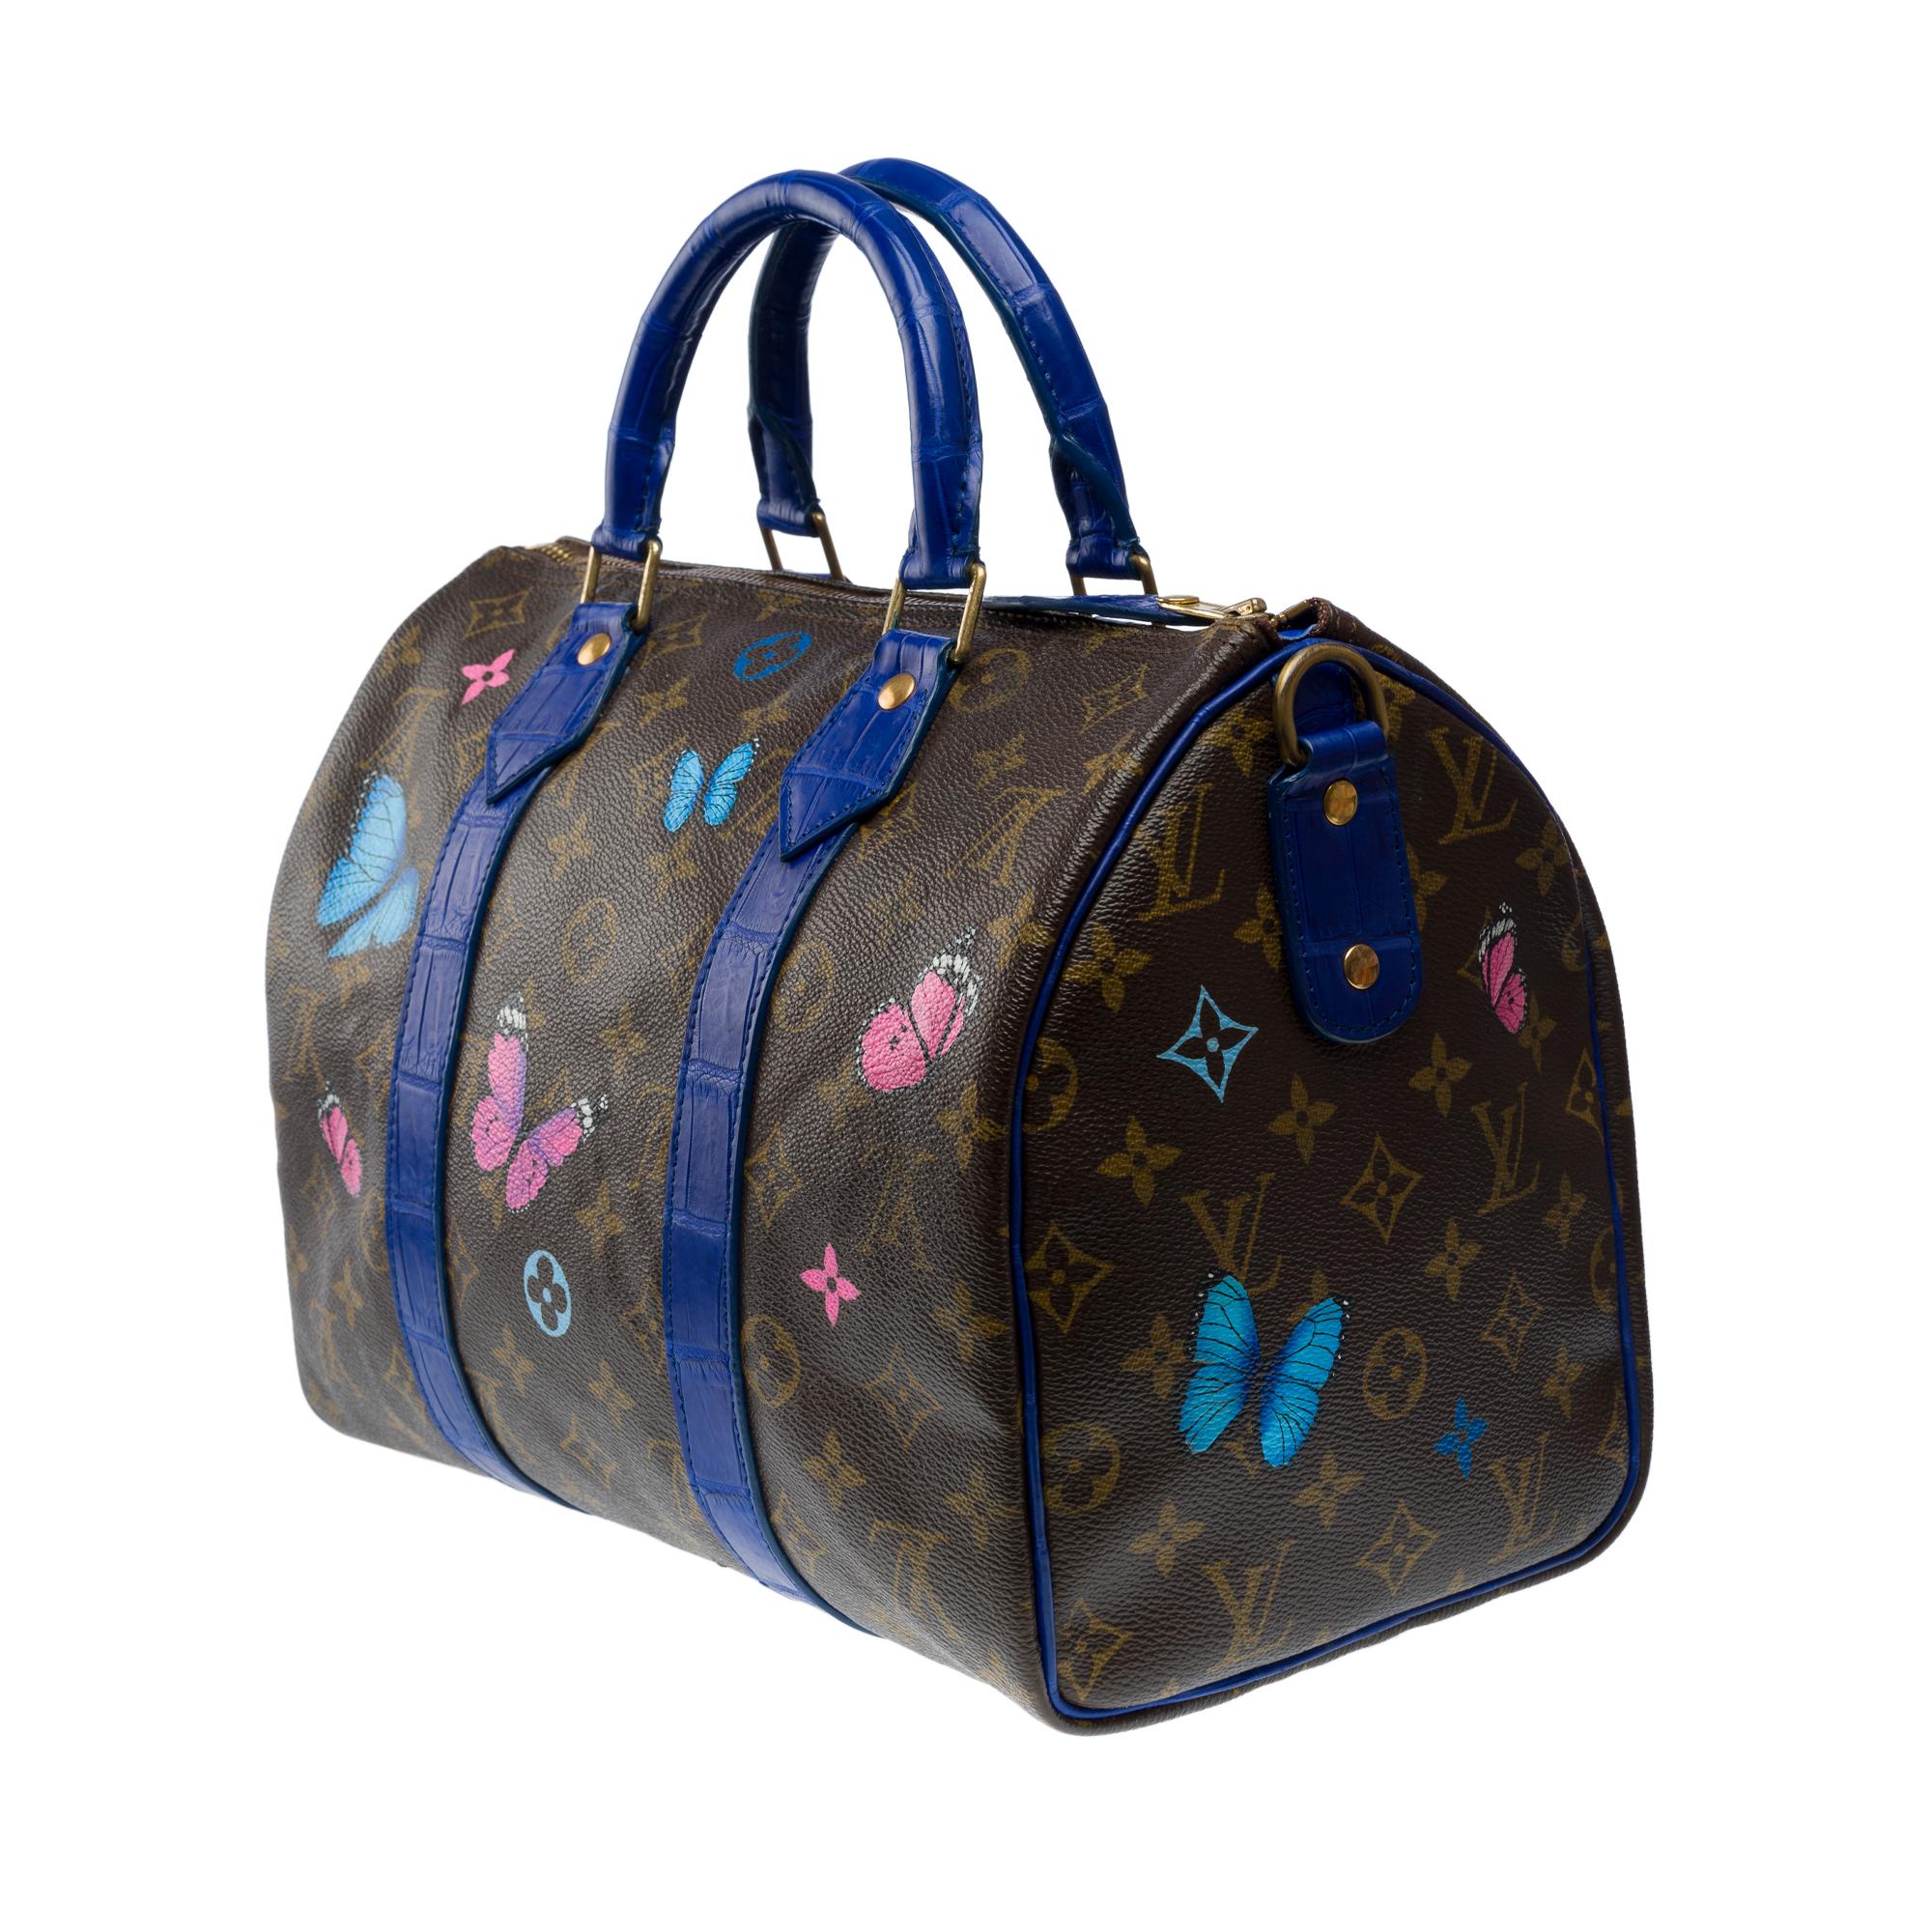 Customized Louis Vuitton Speedy 30 handbag Butterfly with Blue Crocodile leather For Sale 1